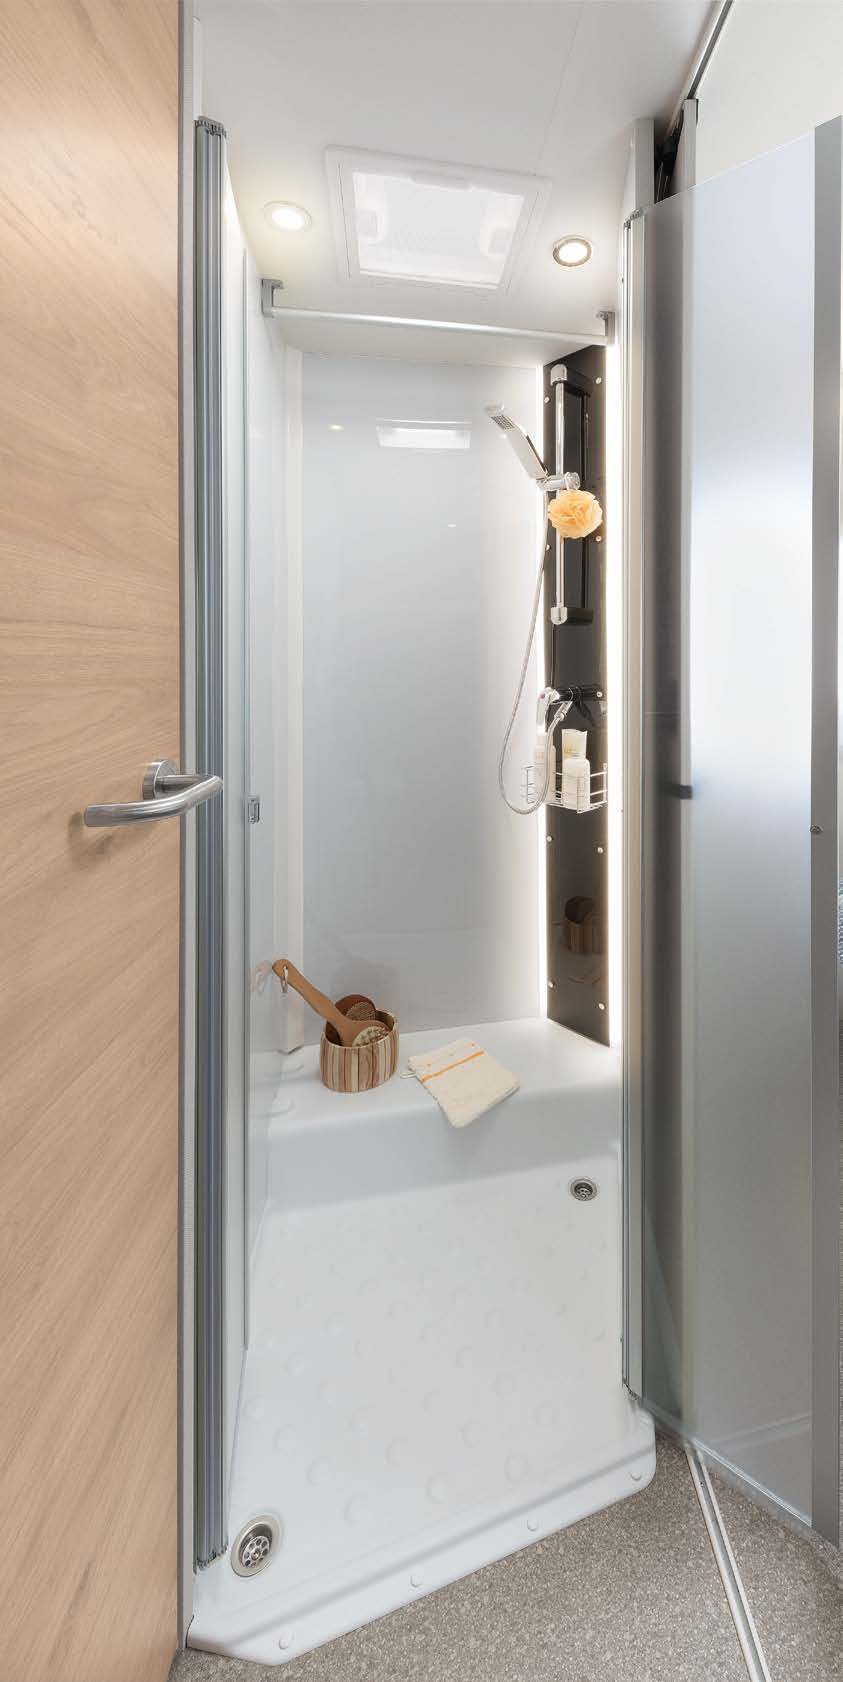 Separate shower cubicle with backlit shower fittings • T 7051 DBL